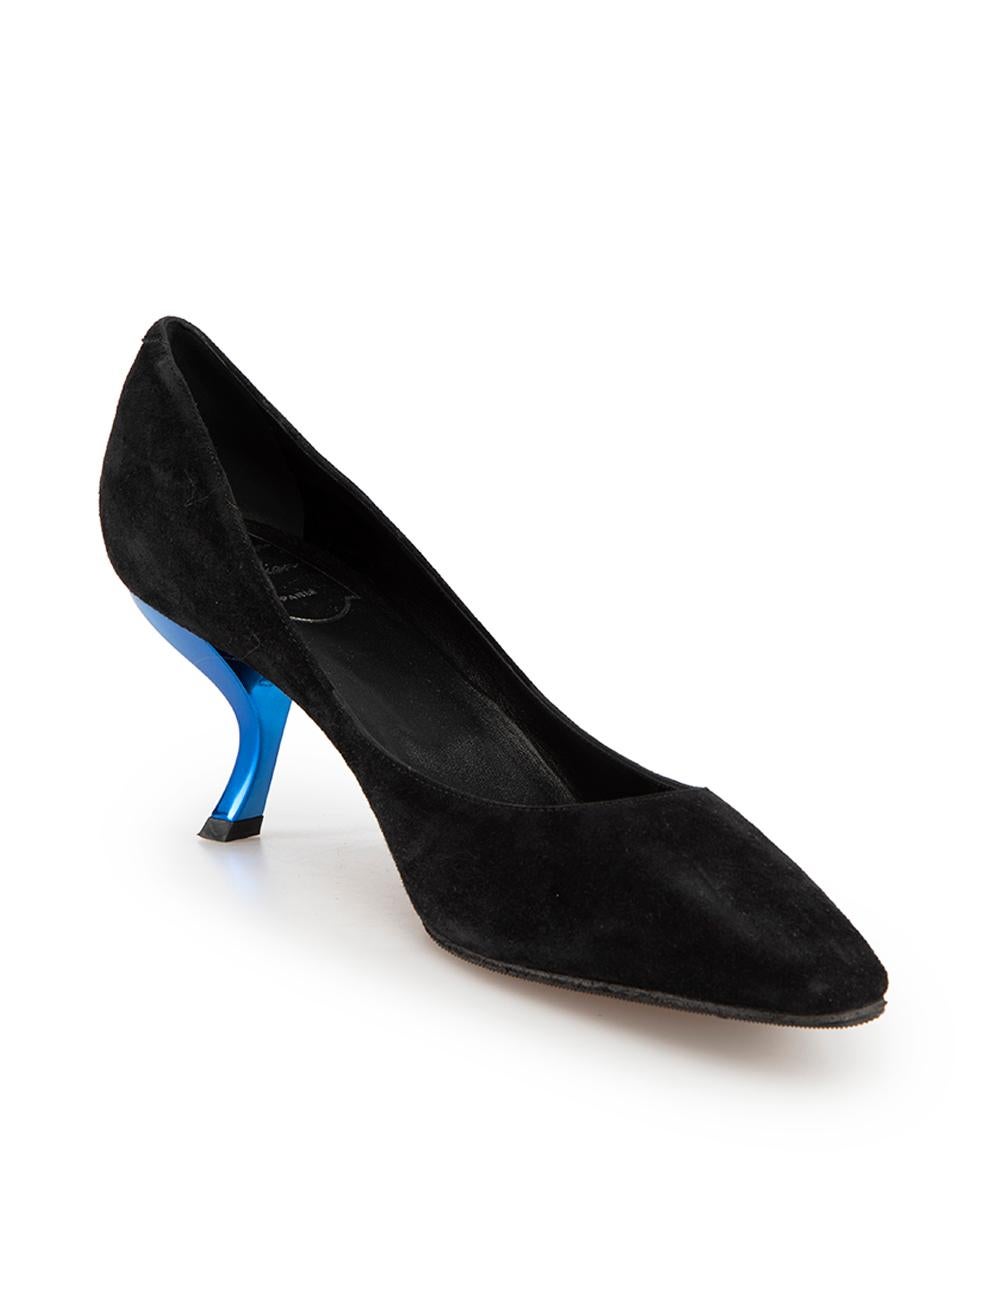 CONDITION is Very good. Minimal wear to shoes is evident. Minimal wear to the right shoe heel with very light abrasions to the suede on this used Roger Vivier designer resale item. Please note that these shoes has been resoled.
 
 Details
 Black
